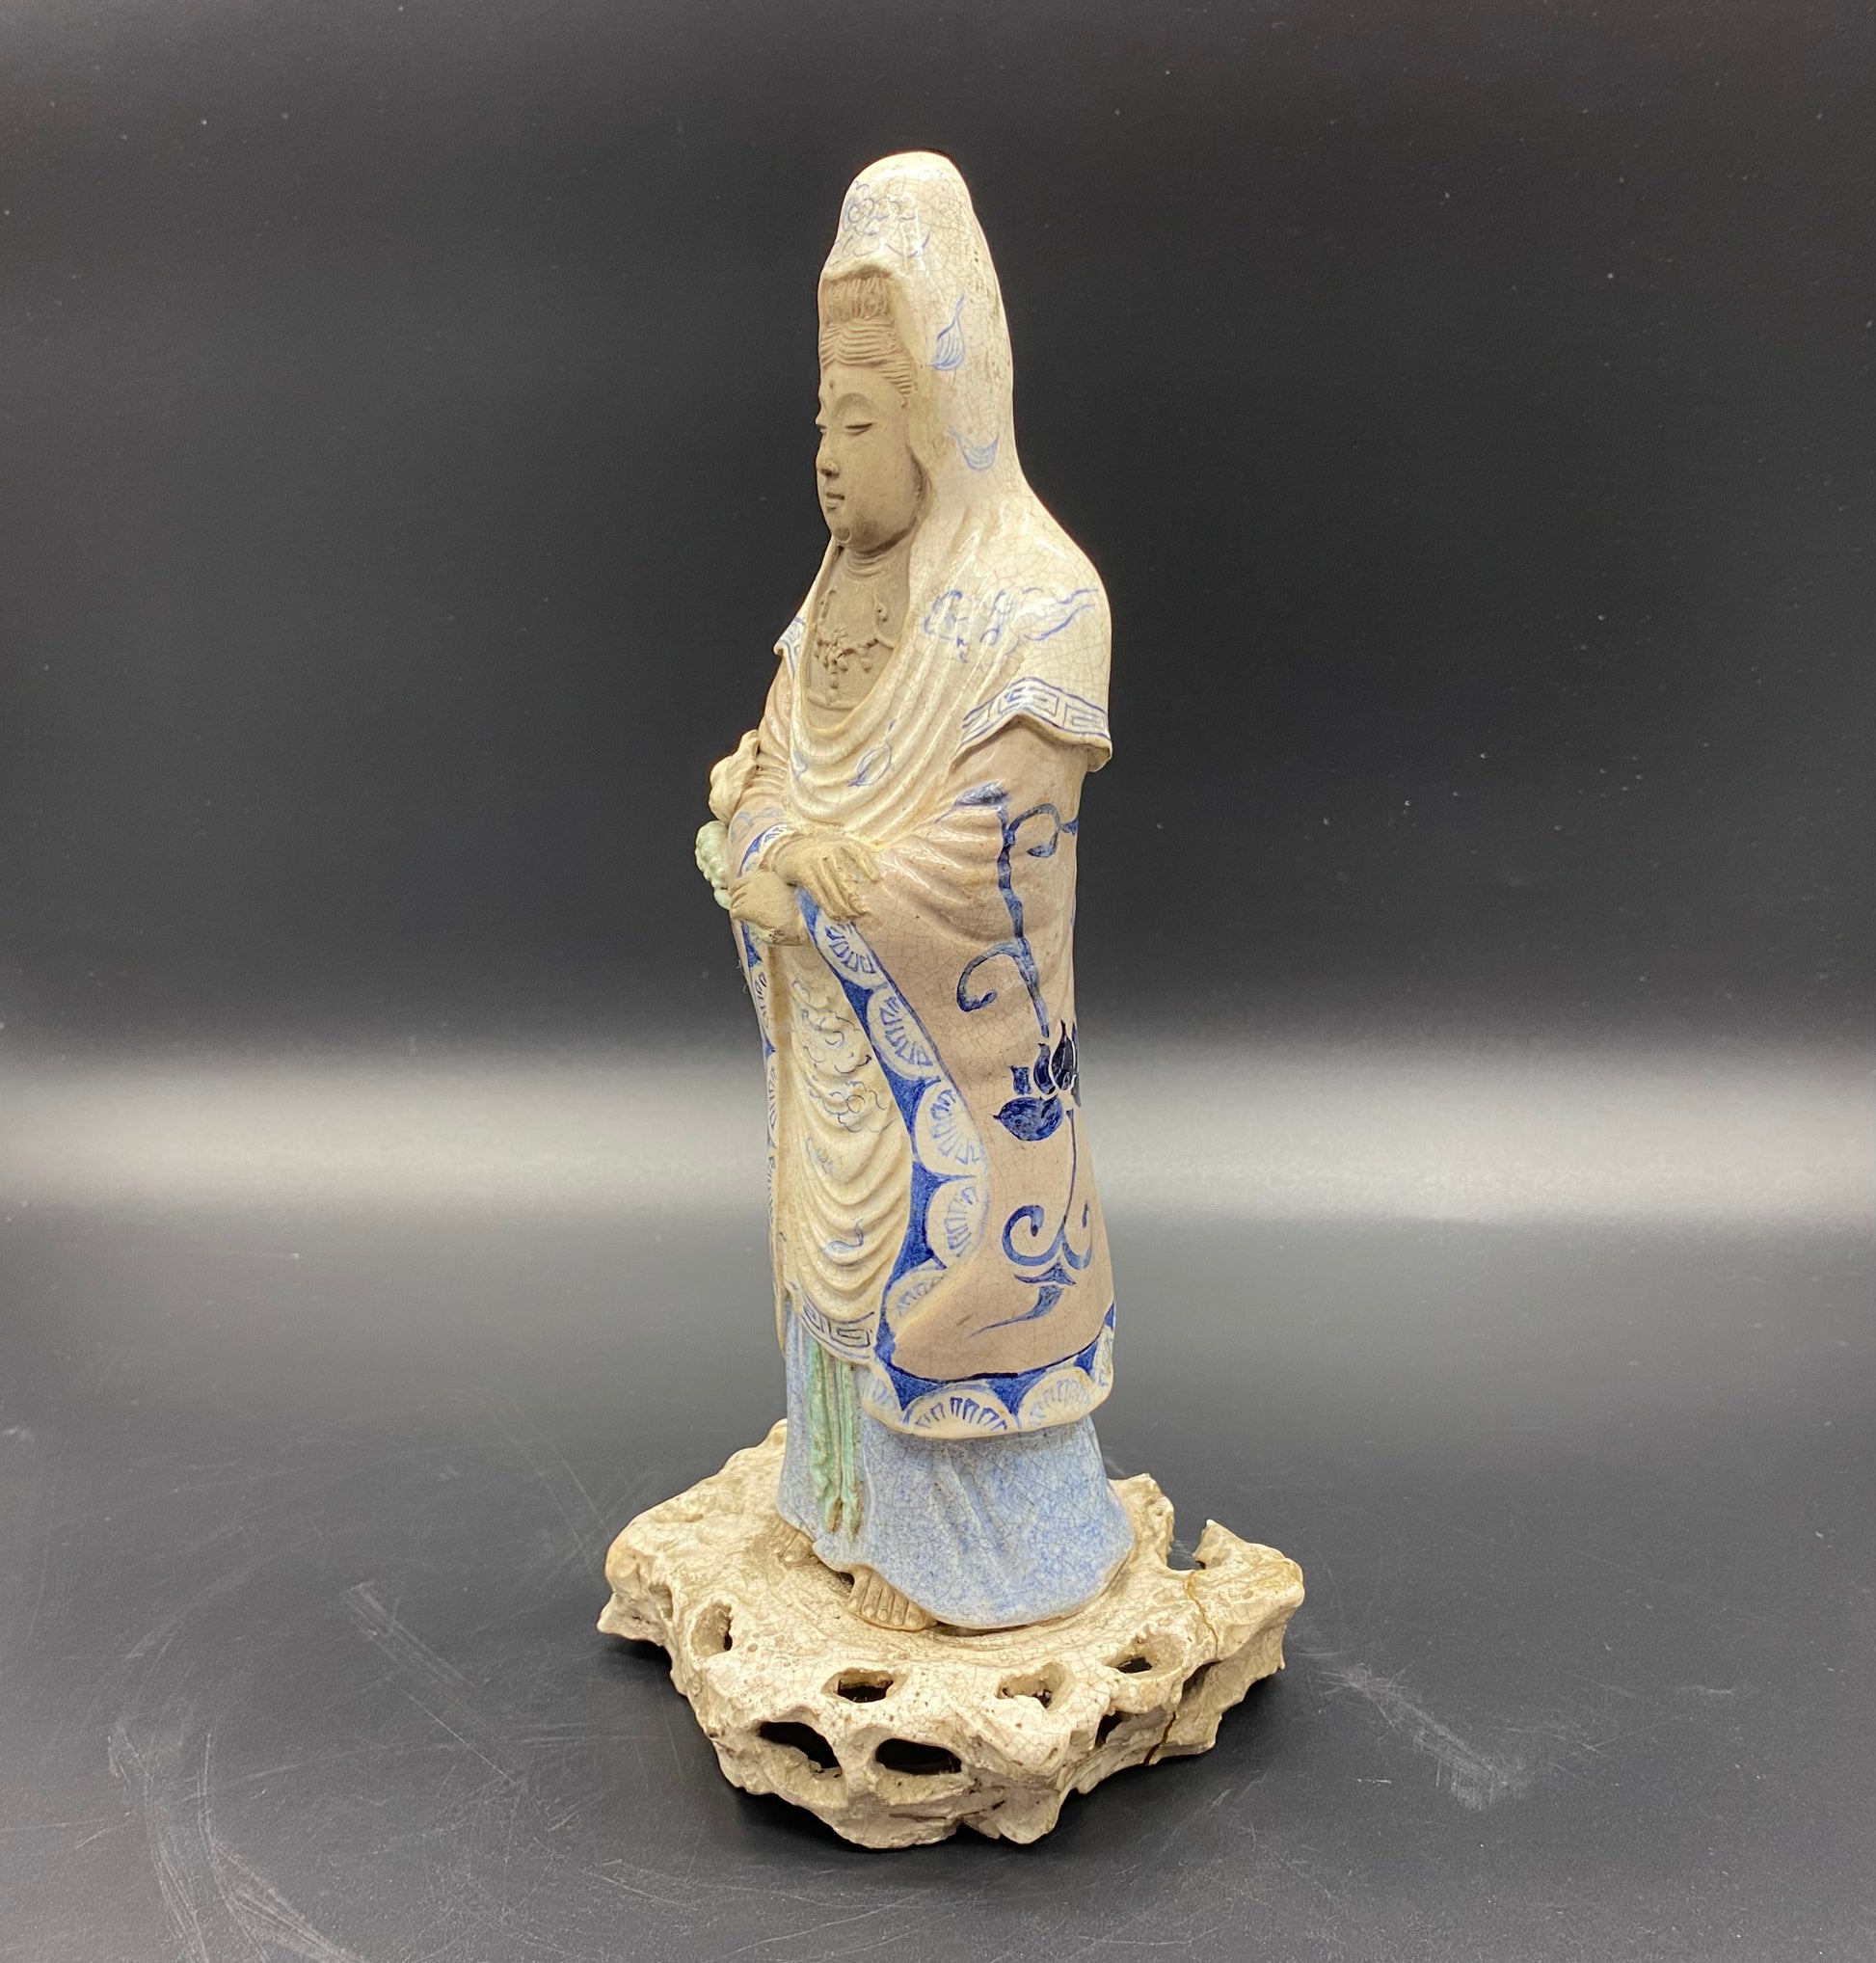 RARE Unusual & Extremely well Modelled Japanese Edo Period Crackle Were Guan Yin Pottery Figurine BUY ANTIQUES ONLINE 